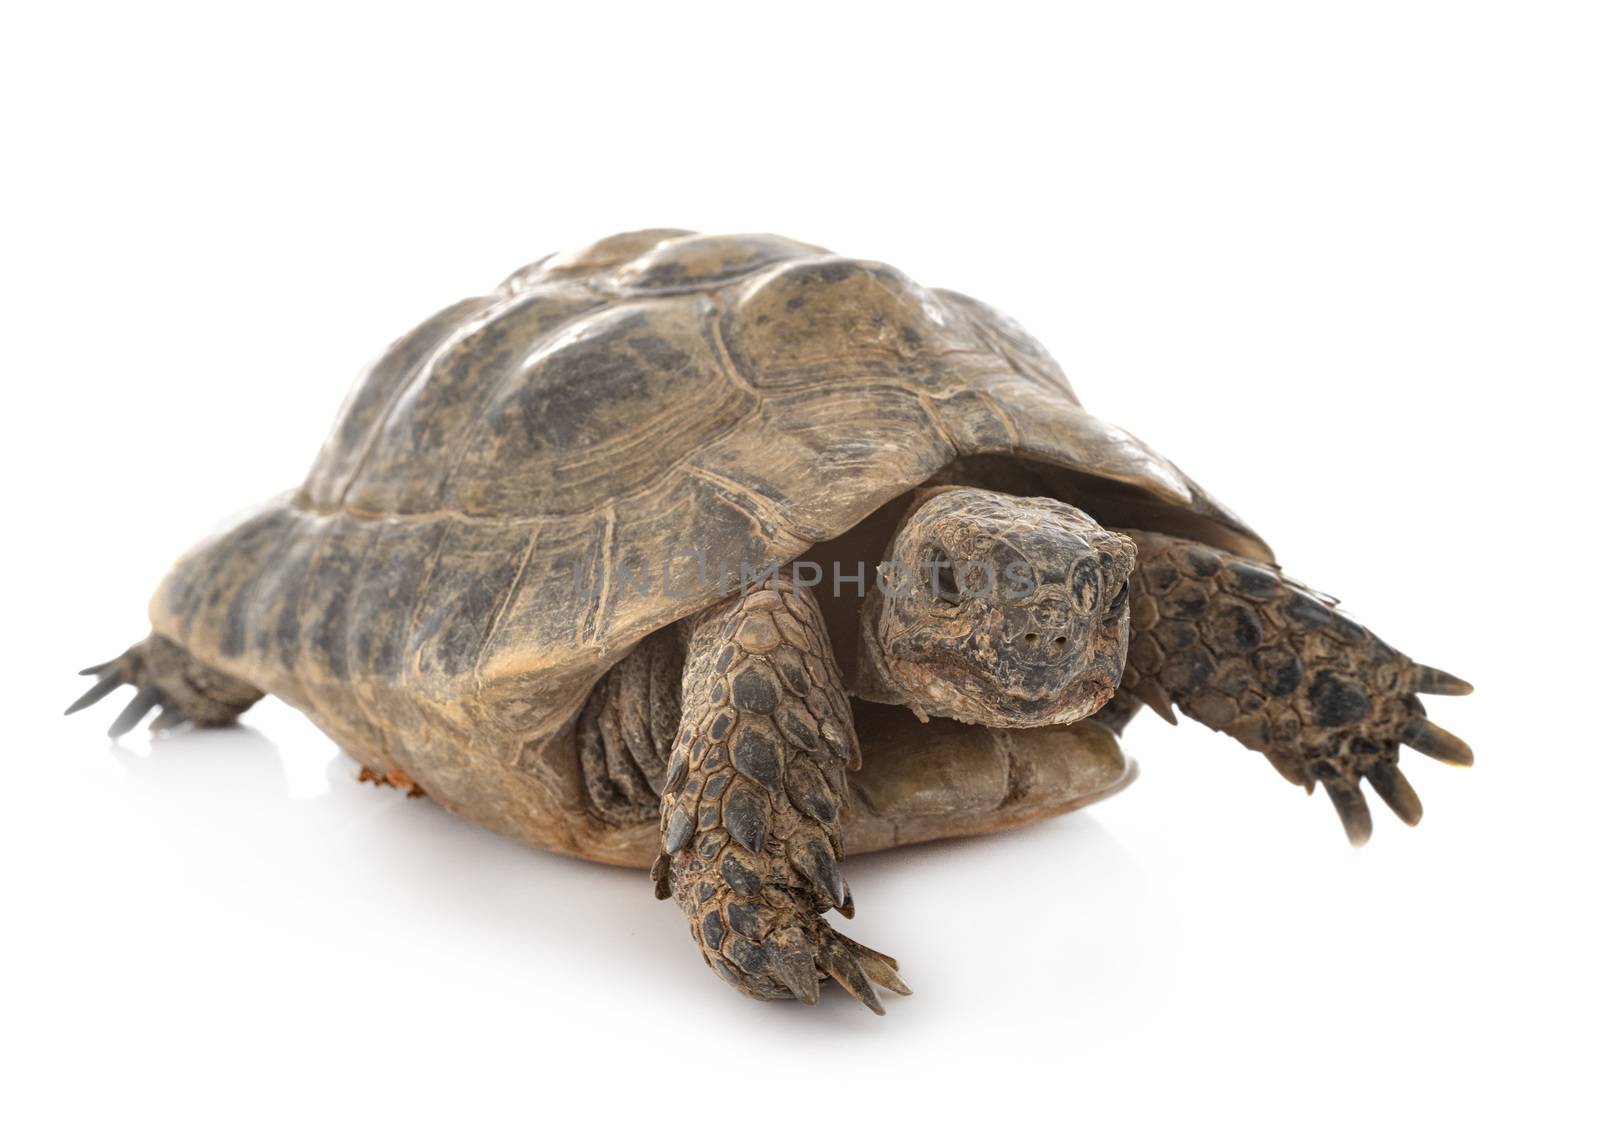 Greek tortoise in front of white background